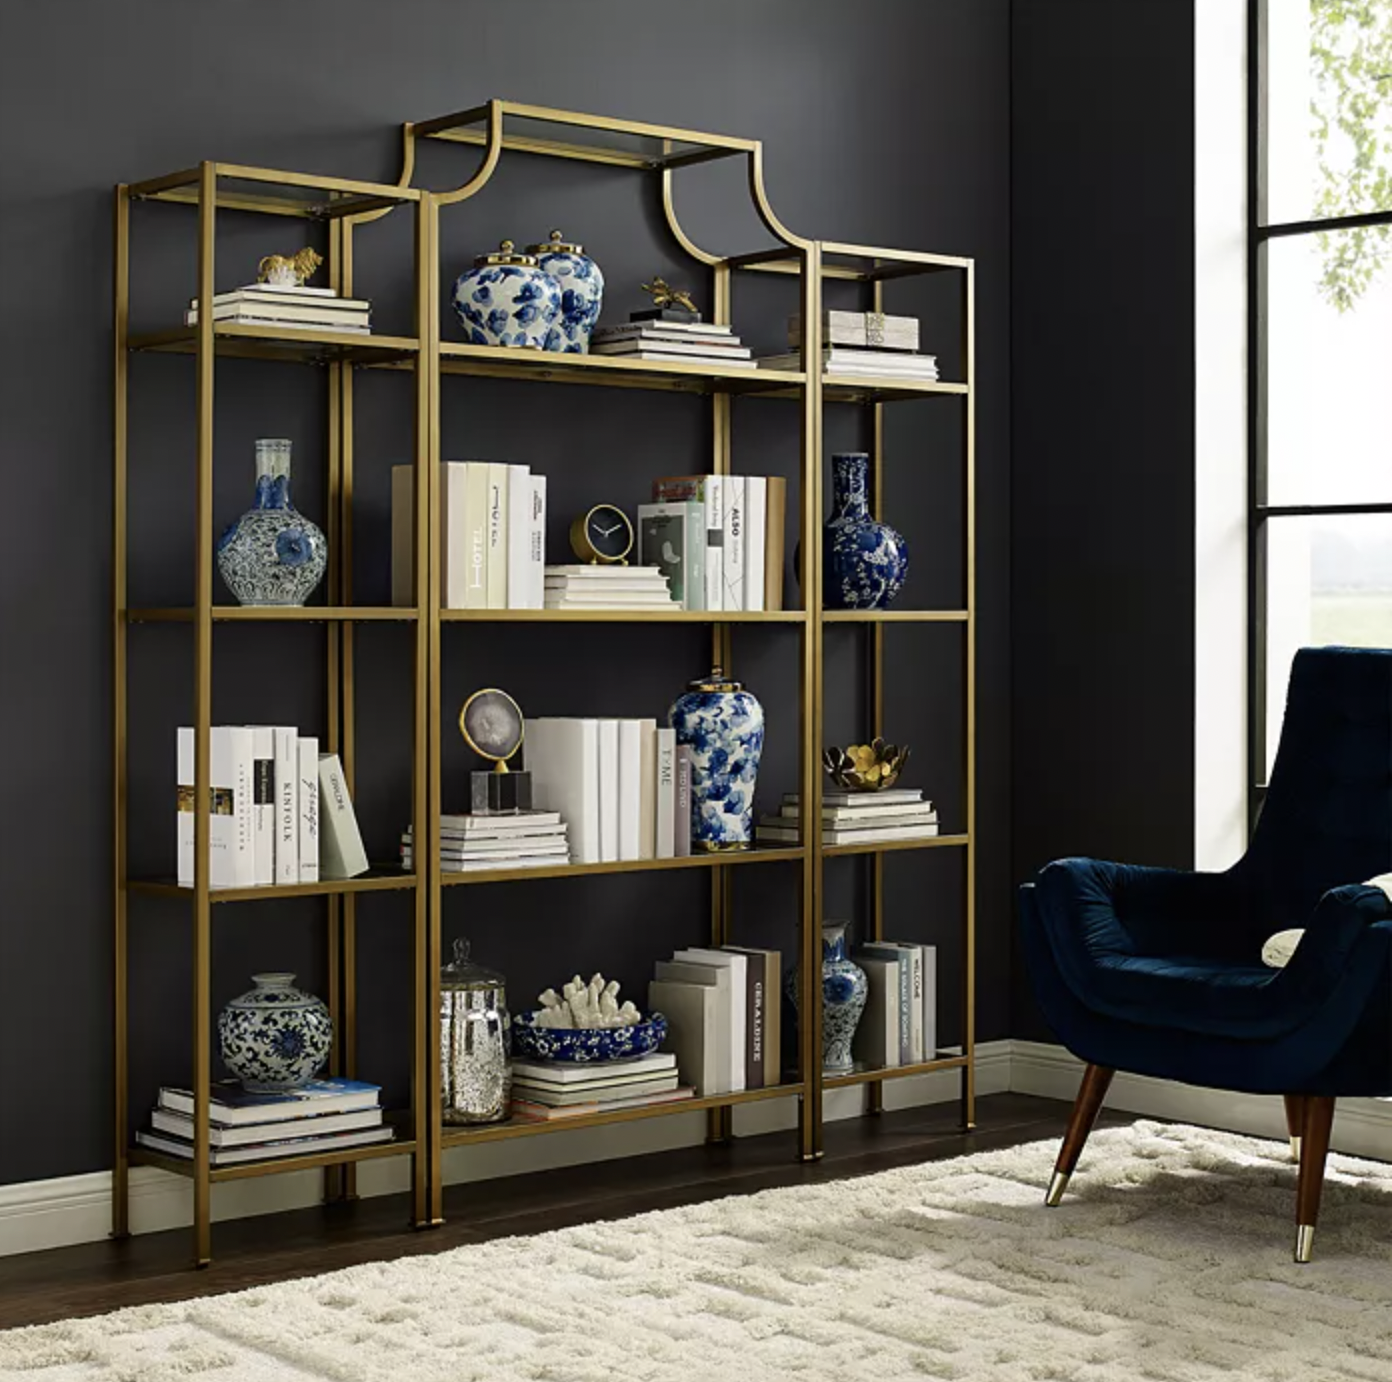 The Most Stylish Bookcases for Every Budget